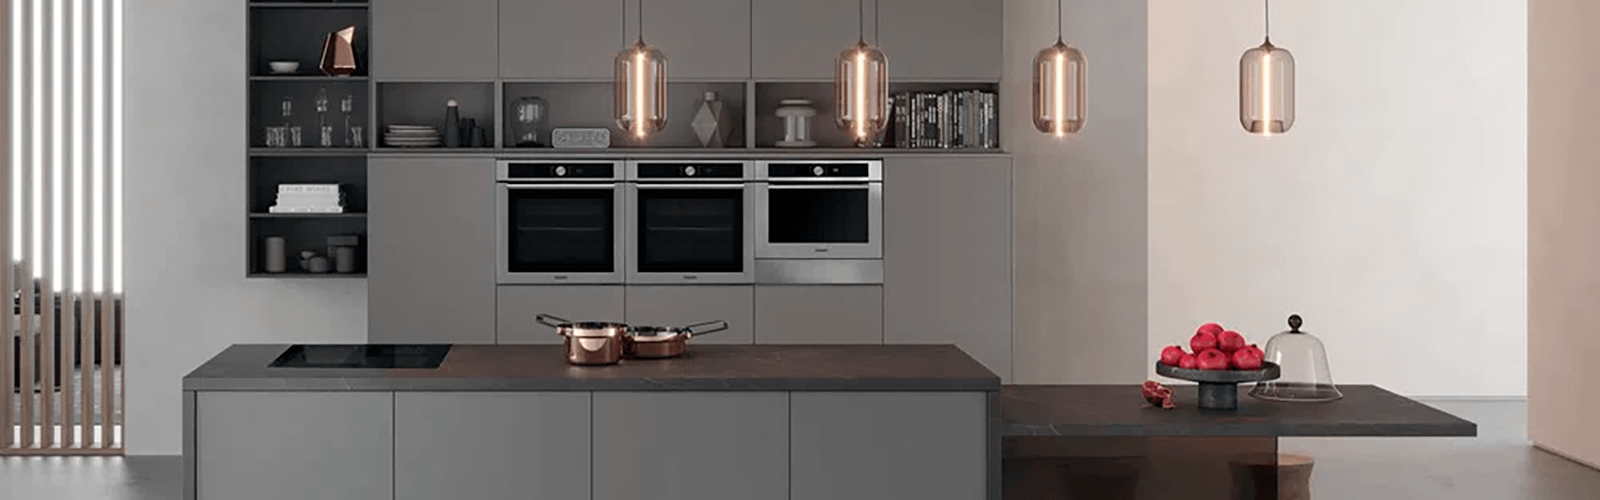 Grey kitchen with 3 built in ovens, a Hotpoint induction hob, hanging pendant lights and rose gold pans on the counter.